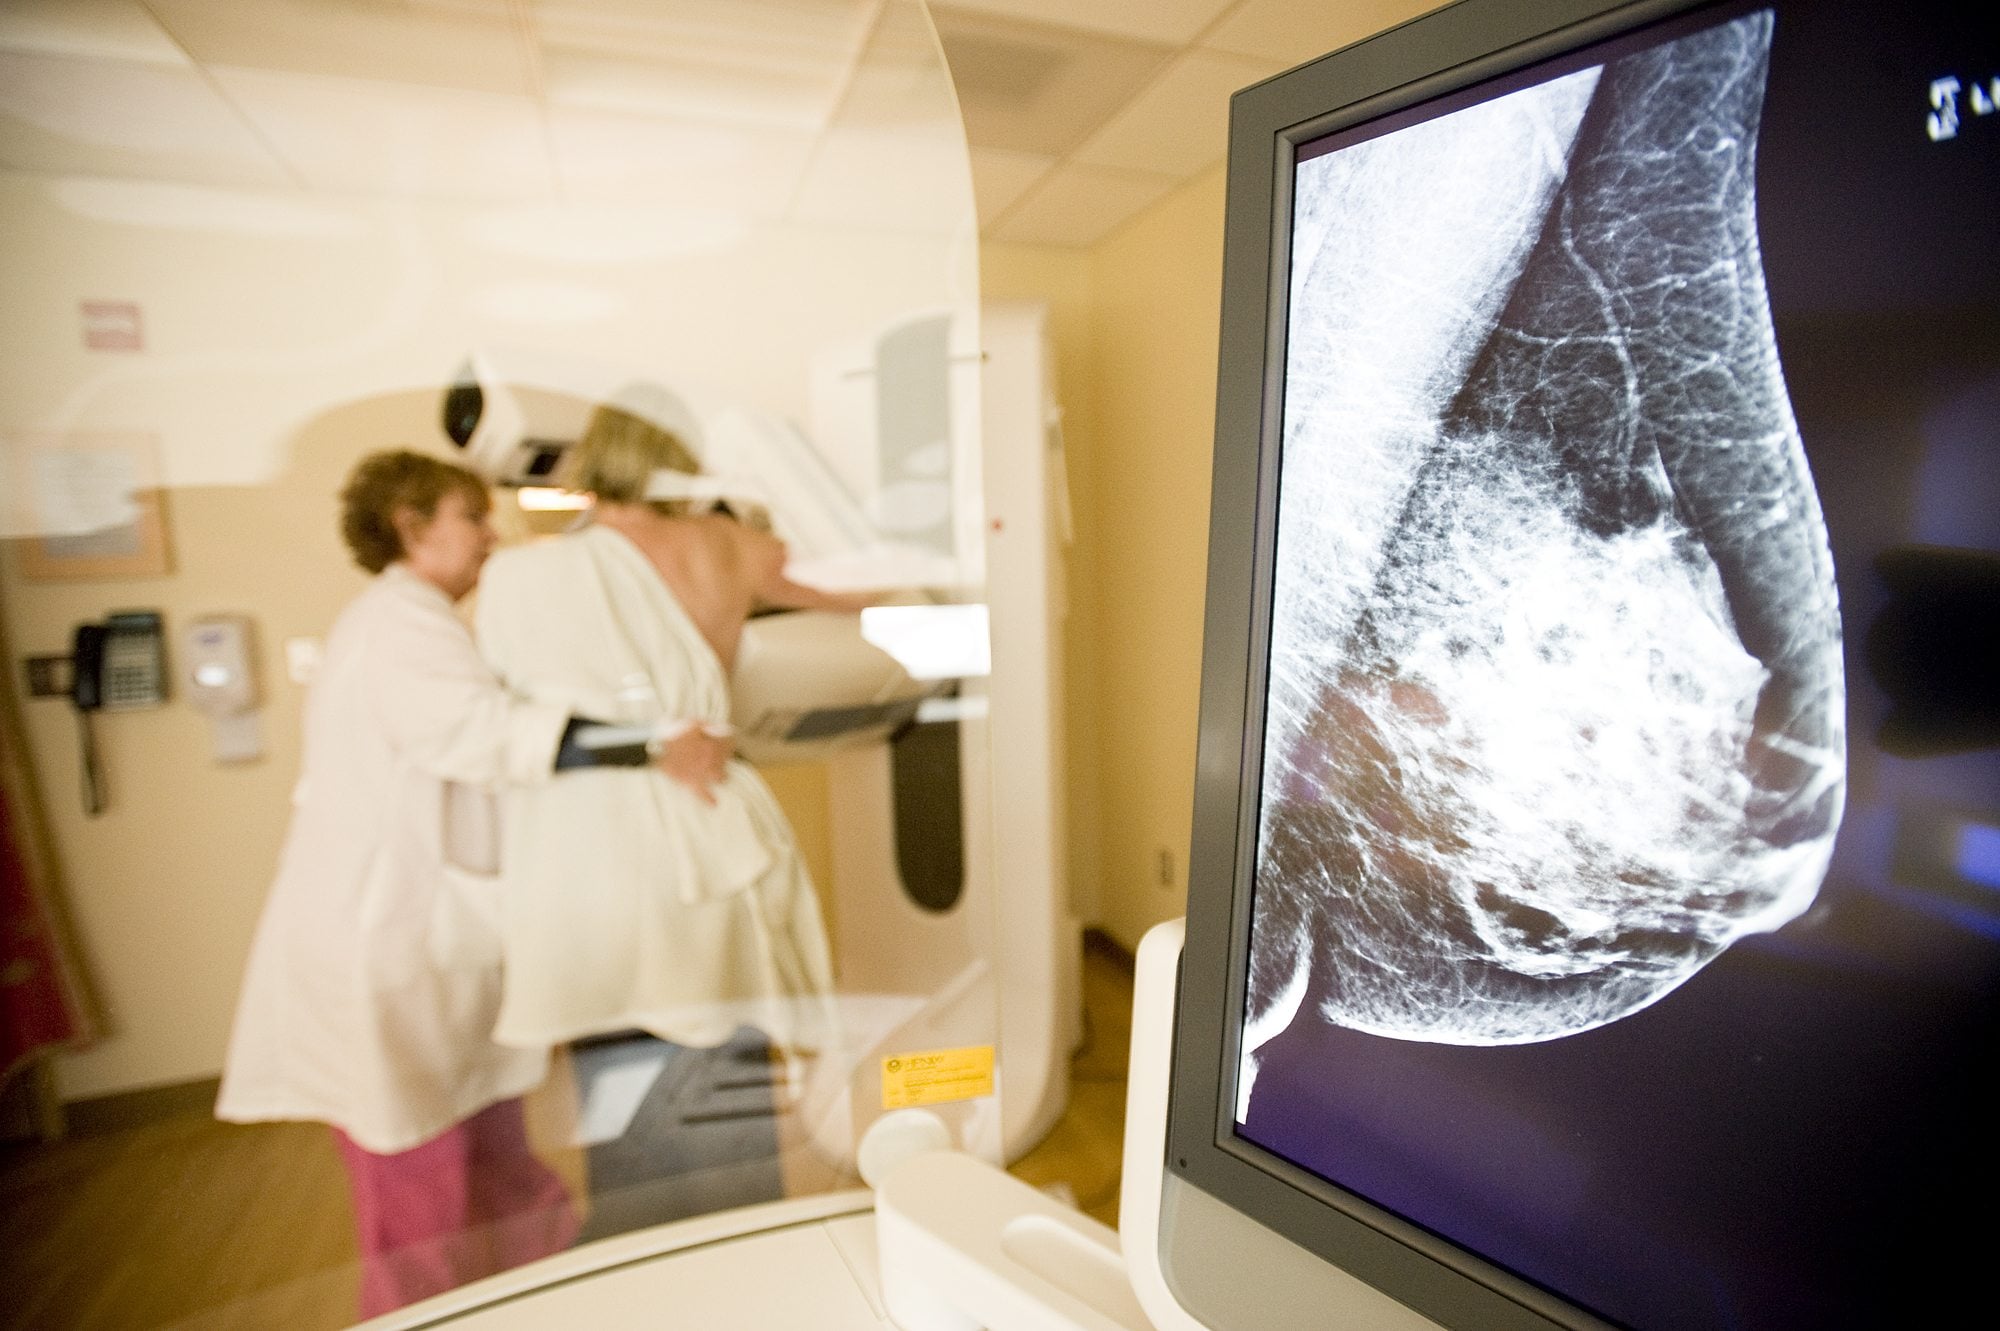 Leslie Dykman, lead mammography technologist at PeaceHealth Southwest Medical Center's Kearney Breast Center, uses new 3-D technology to perform a mammogram on a patient Monday. The 3-D mammograms take multiple photos of the breast, tissue-layer by tissue-layer.